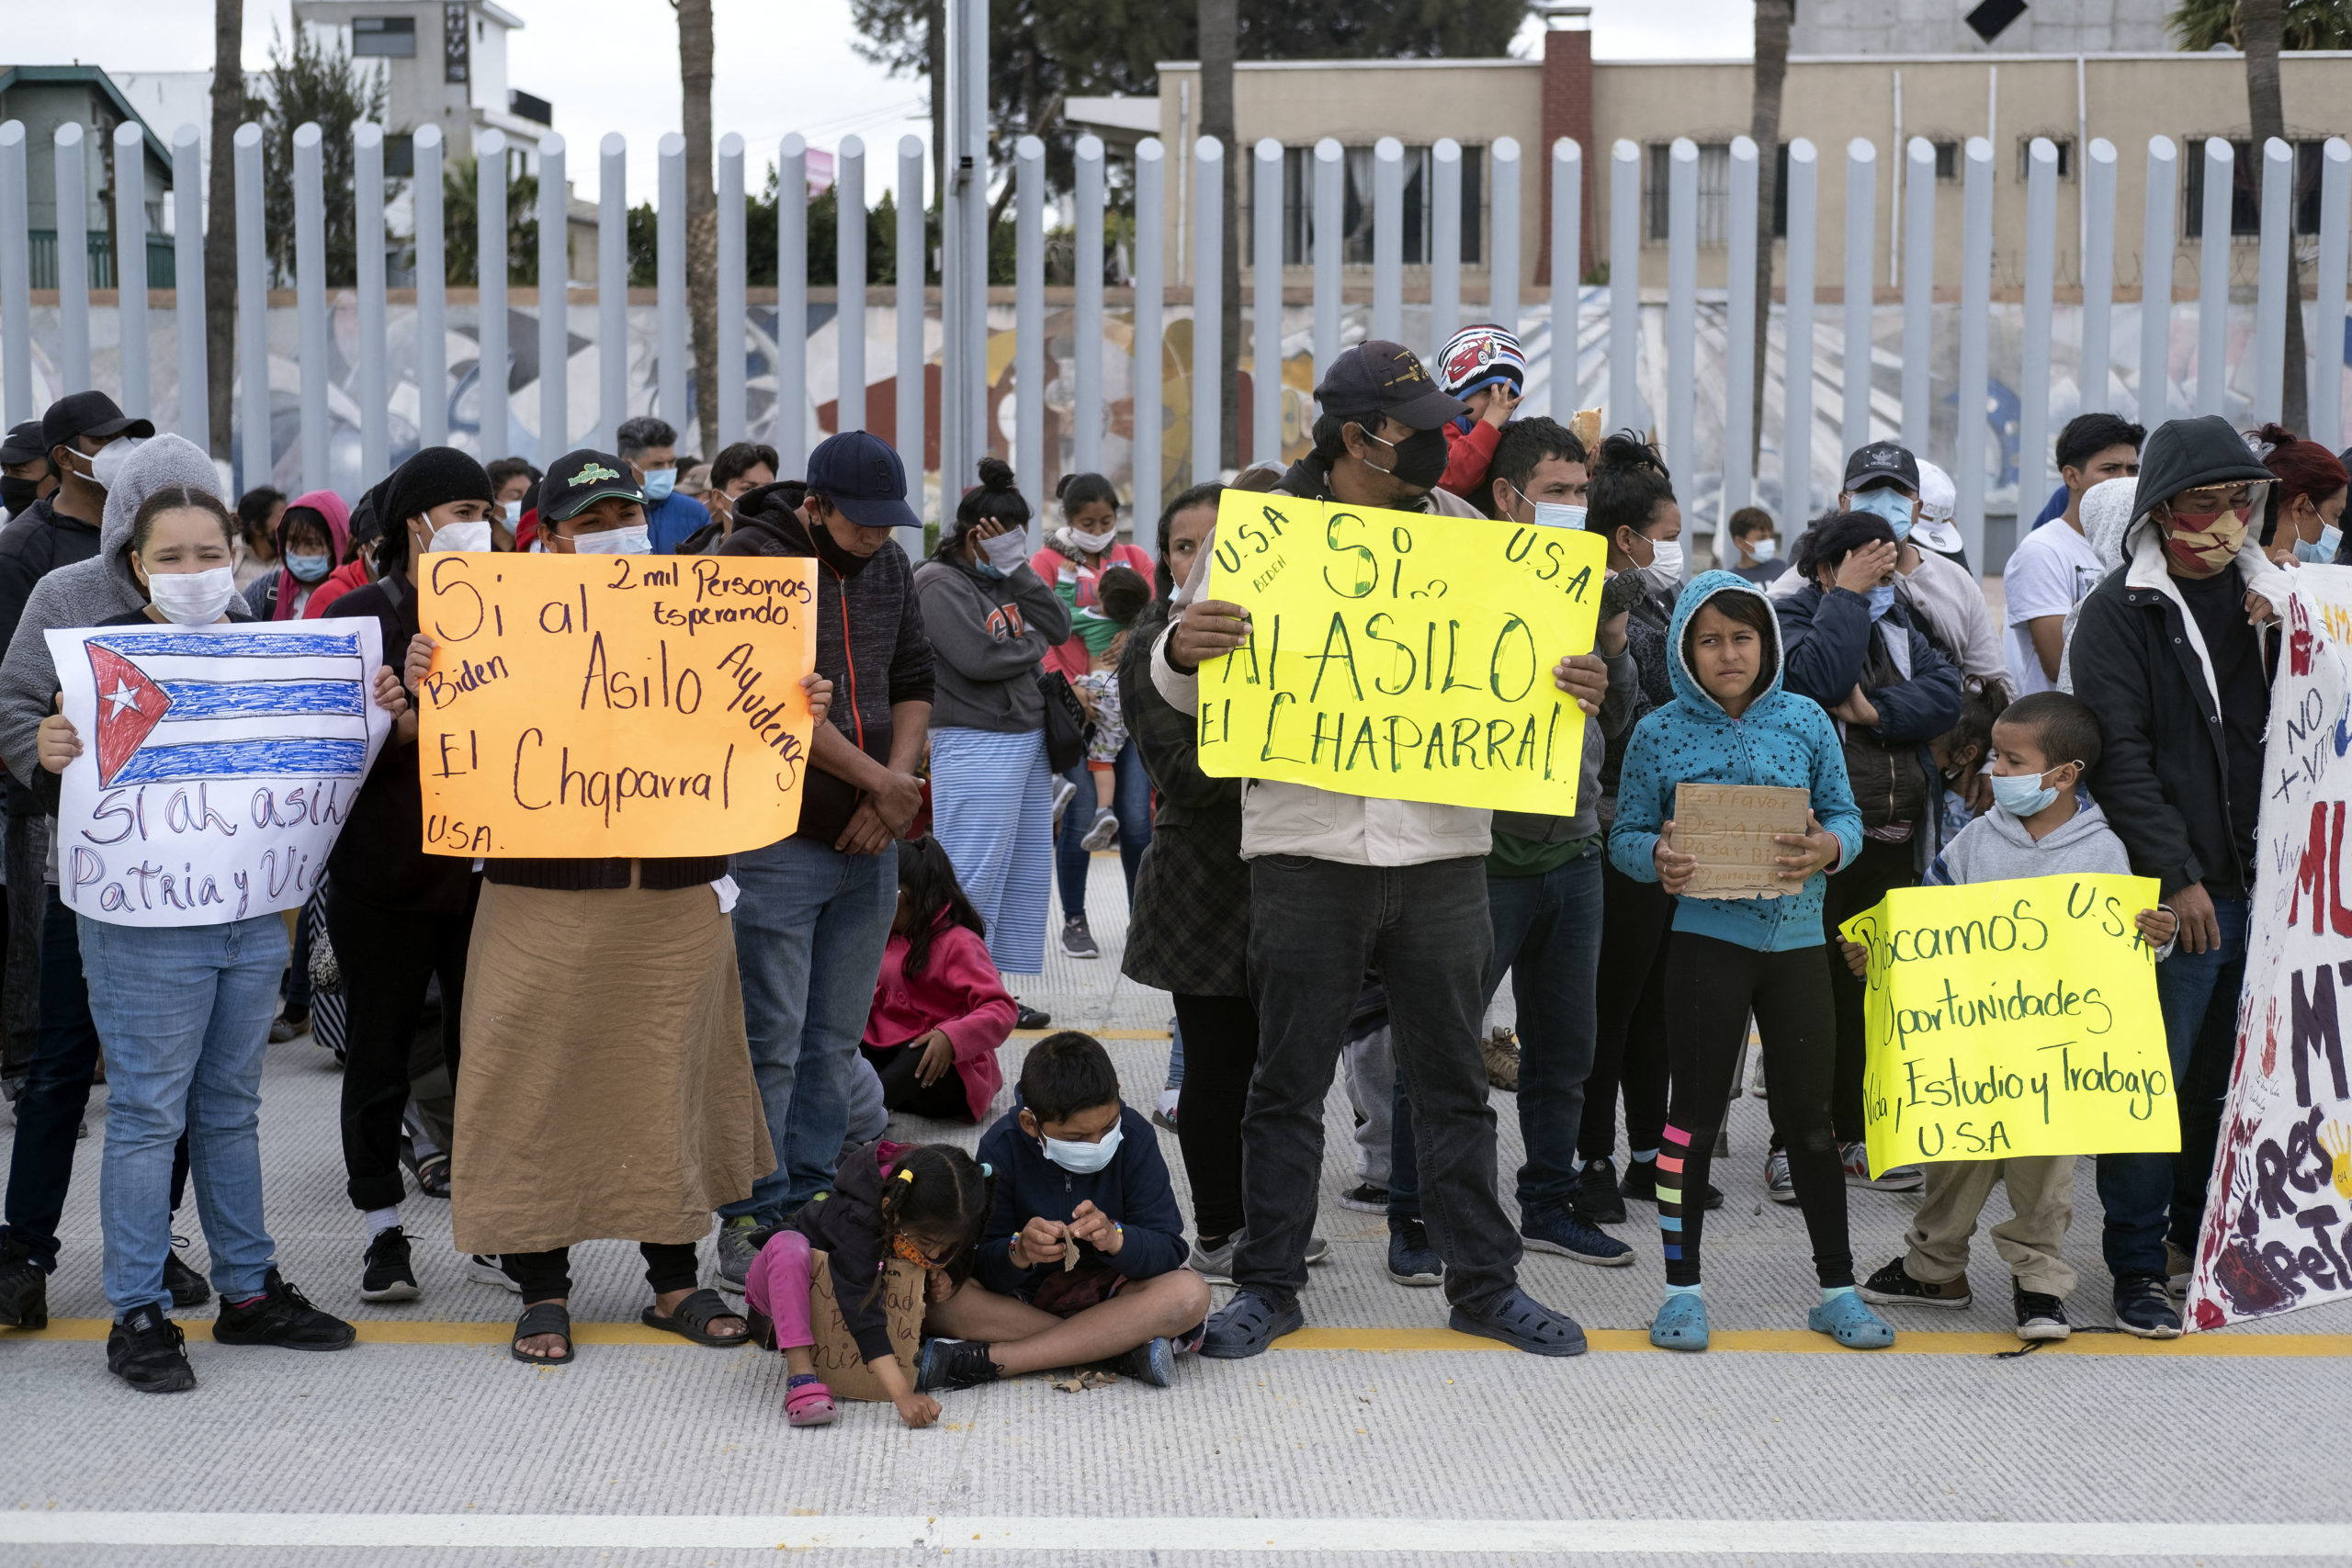 Migrants and asylum seekers demonstrate at the San Ysidro crossing port asking US authorities to allow them to start their migration process in Tijuana, Baja California state, Mexico on March 23, 2021. (GUILLERMO ARIAS/AFP via Getty Images)